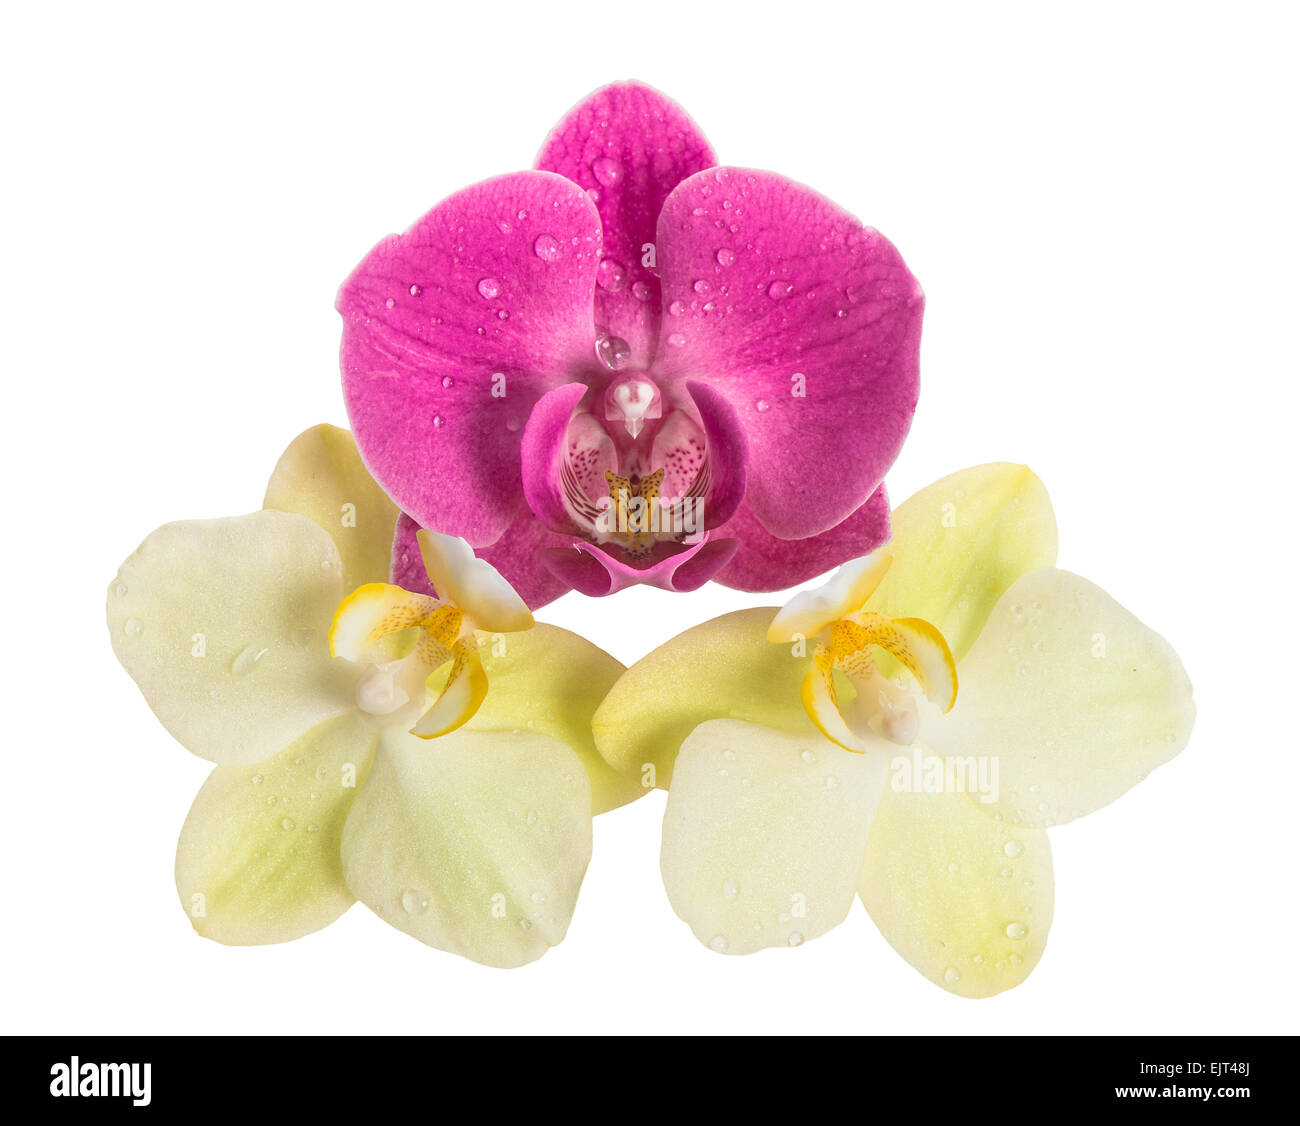 Orchid flower head isolated on white background. Fresh pink and yellow blossoms Stock Photo